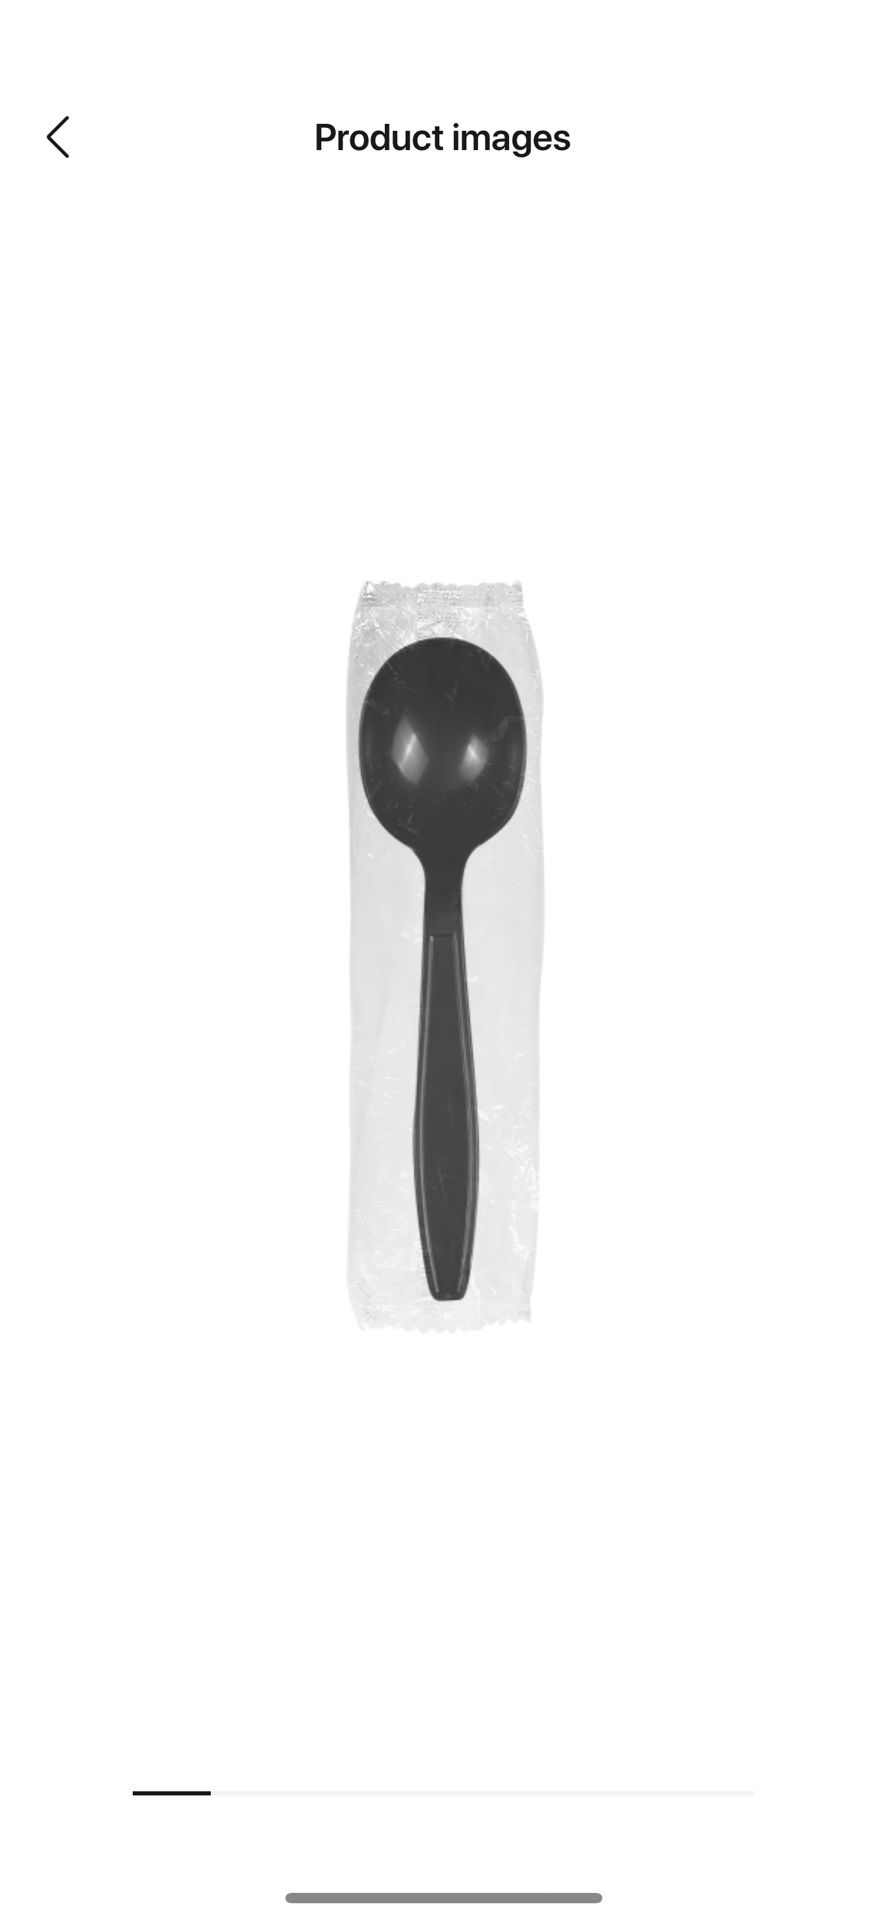 Plastic Heavy Weight Soup Spoons - Black - Wrapped 